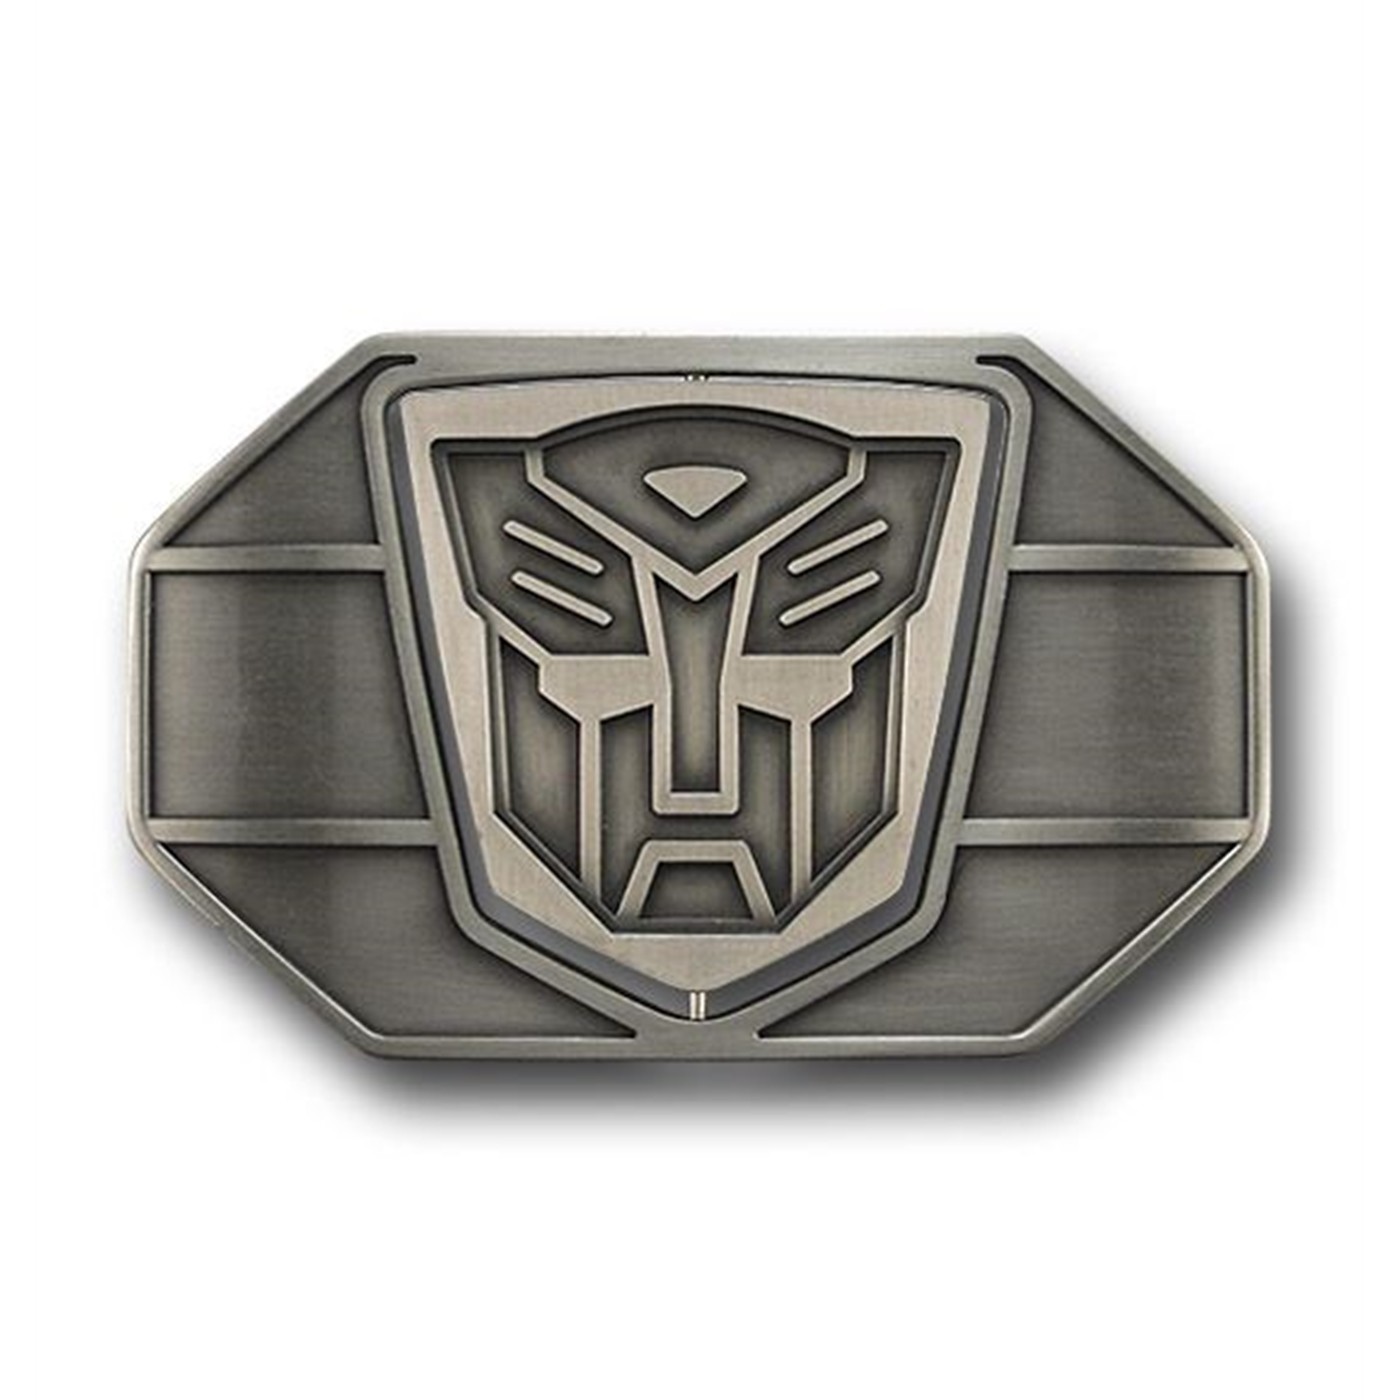 Transformers Autobot Decepticon Symbol Keychain Metal~1 Pair~HIS & HERS~GIFT NEW 